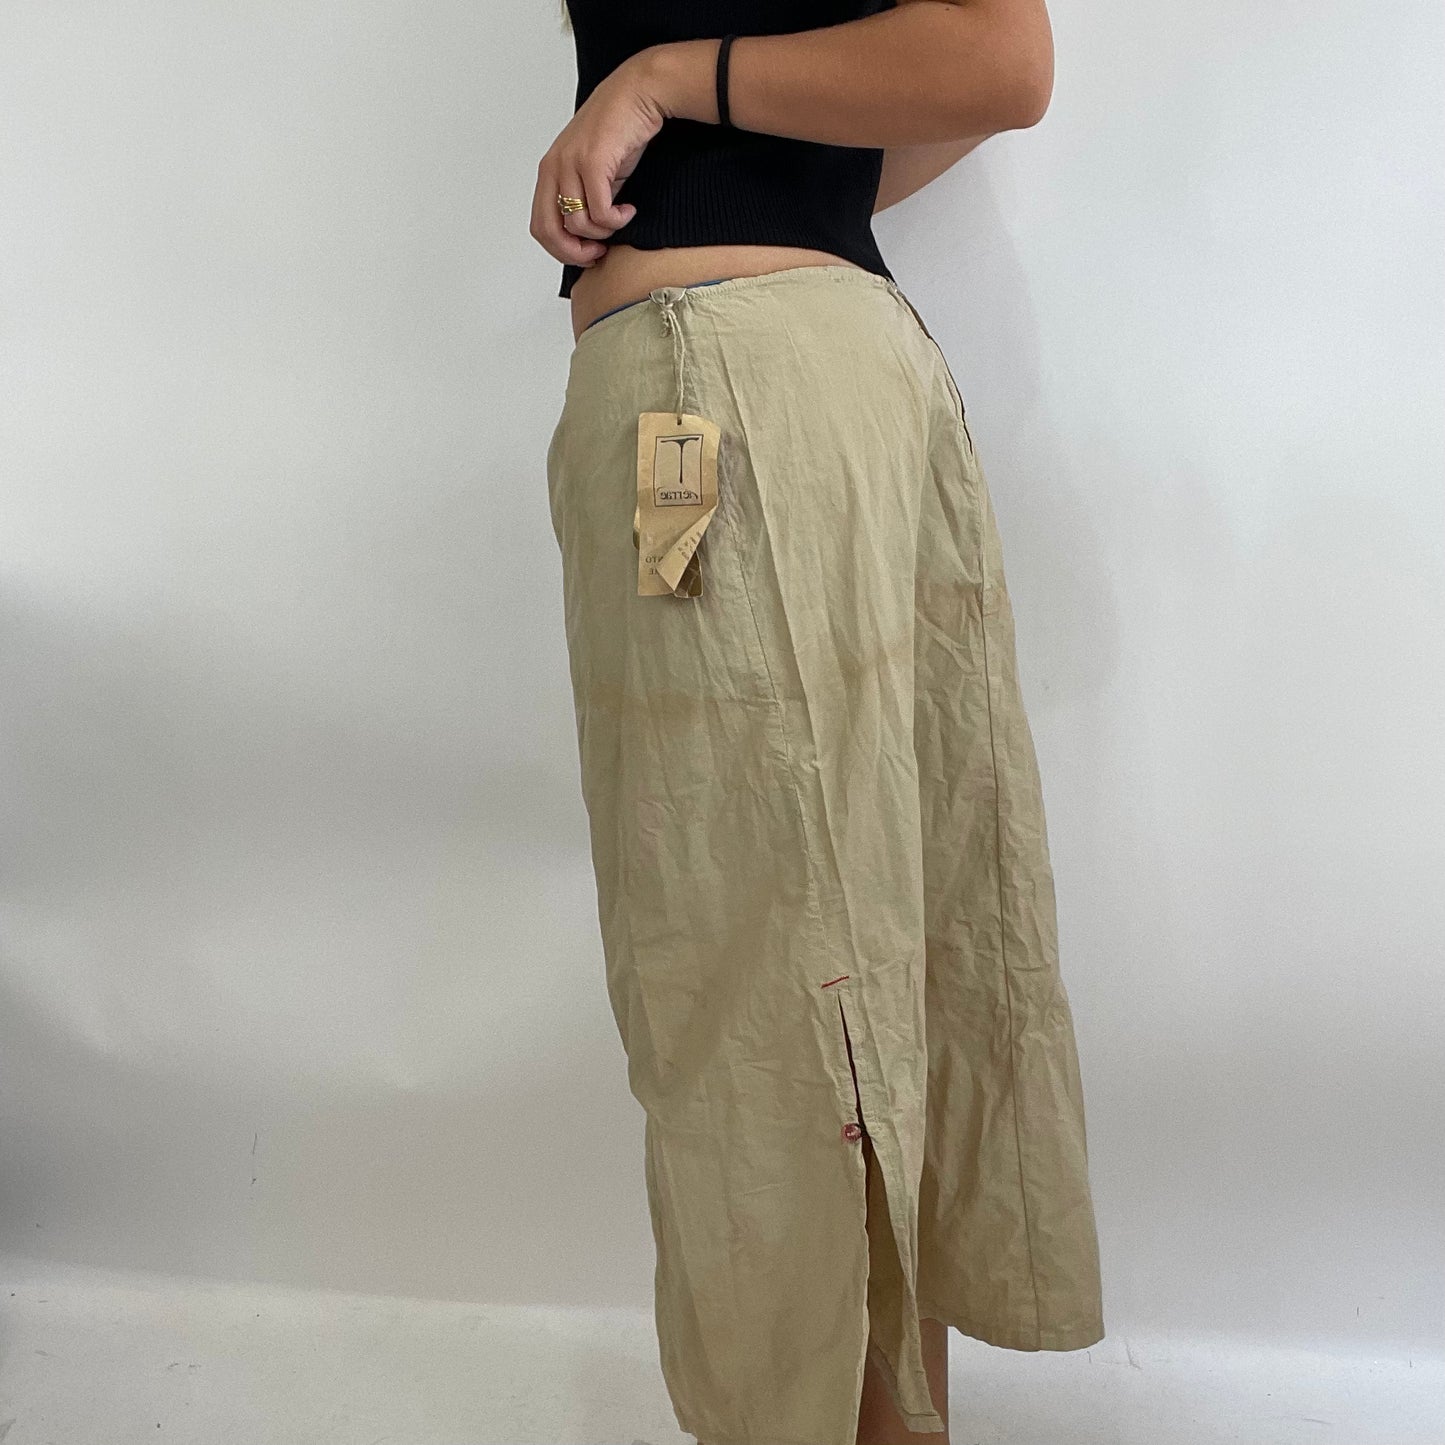 MODEL OFF DUTY DROP | small beige maxi cargo skirt with slit